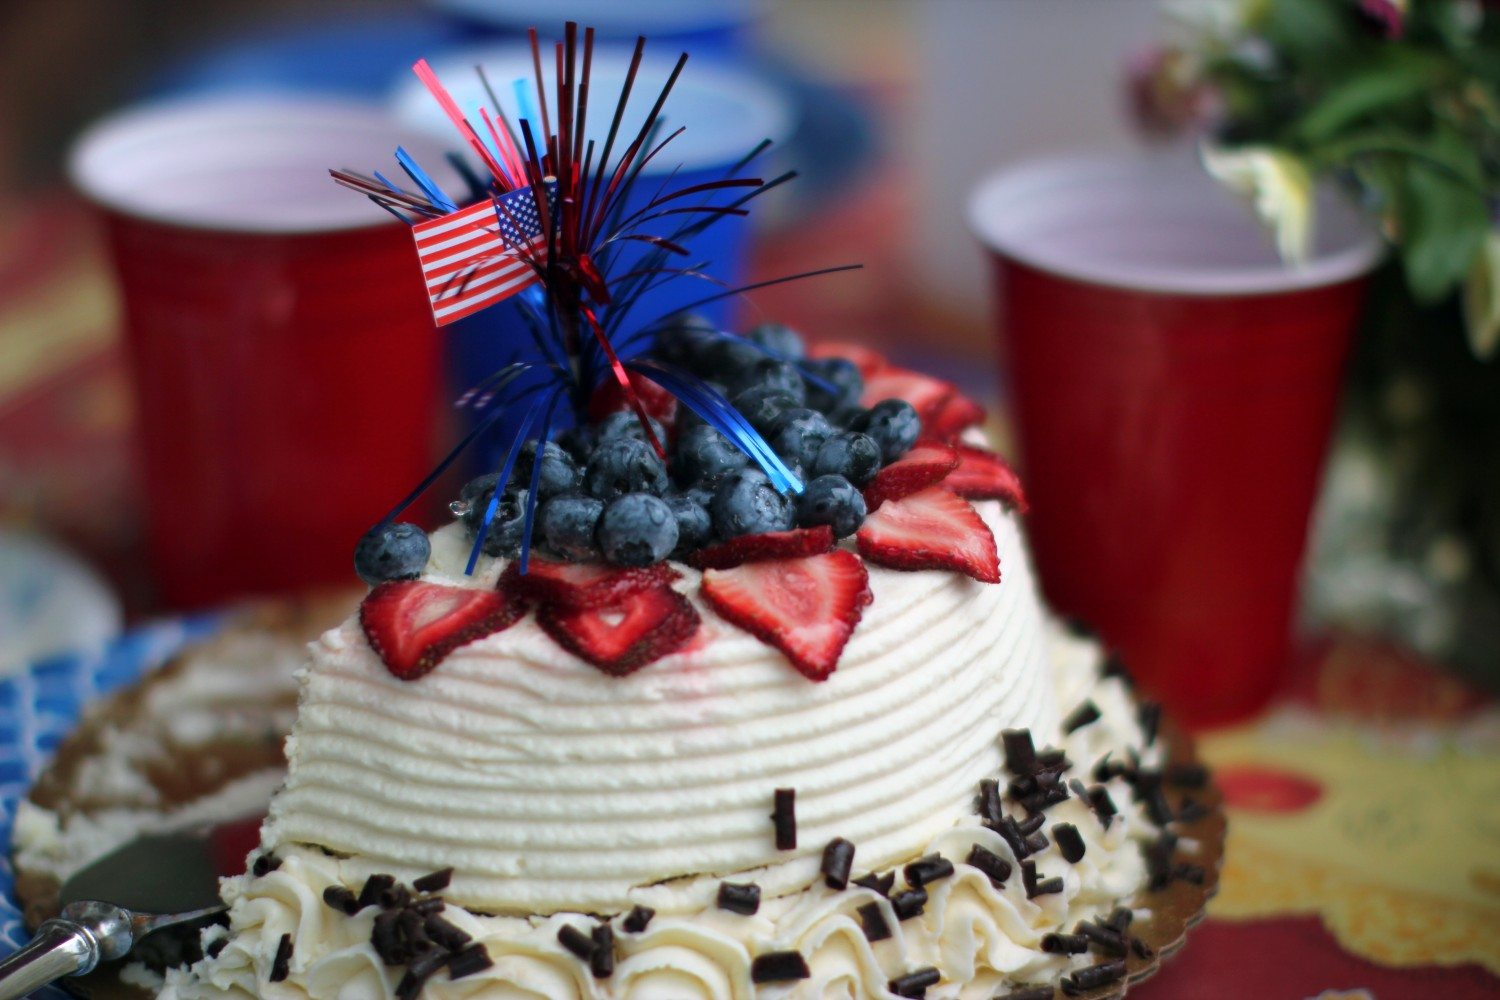 Top 5 Places To Eat Downtown On The 4th of July!